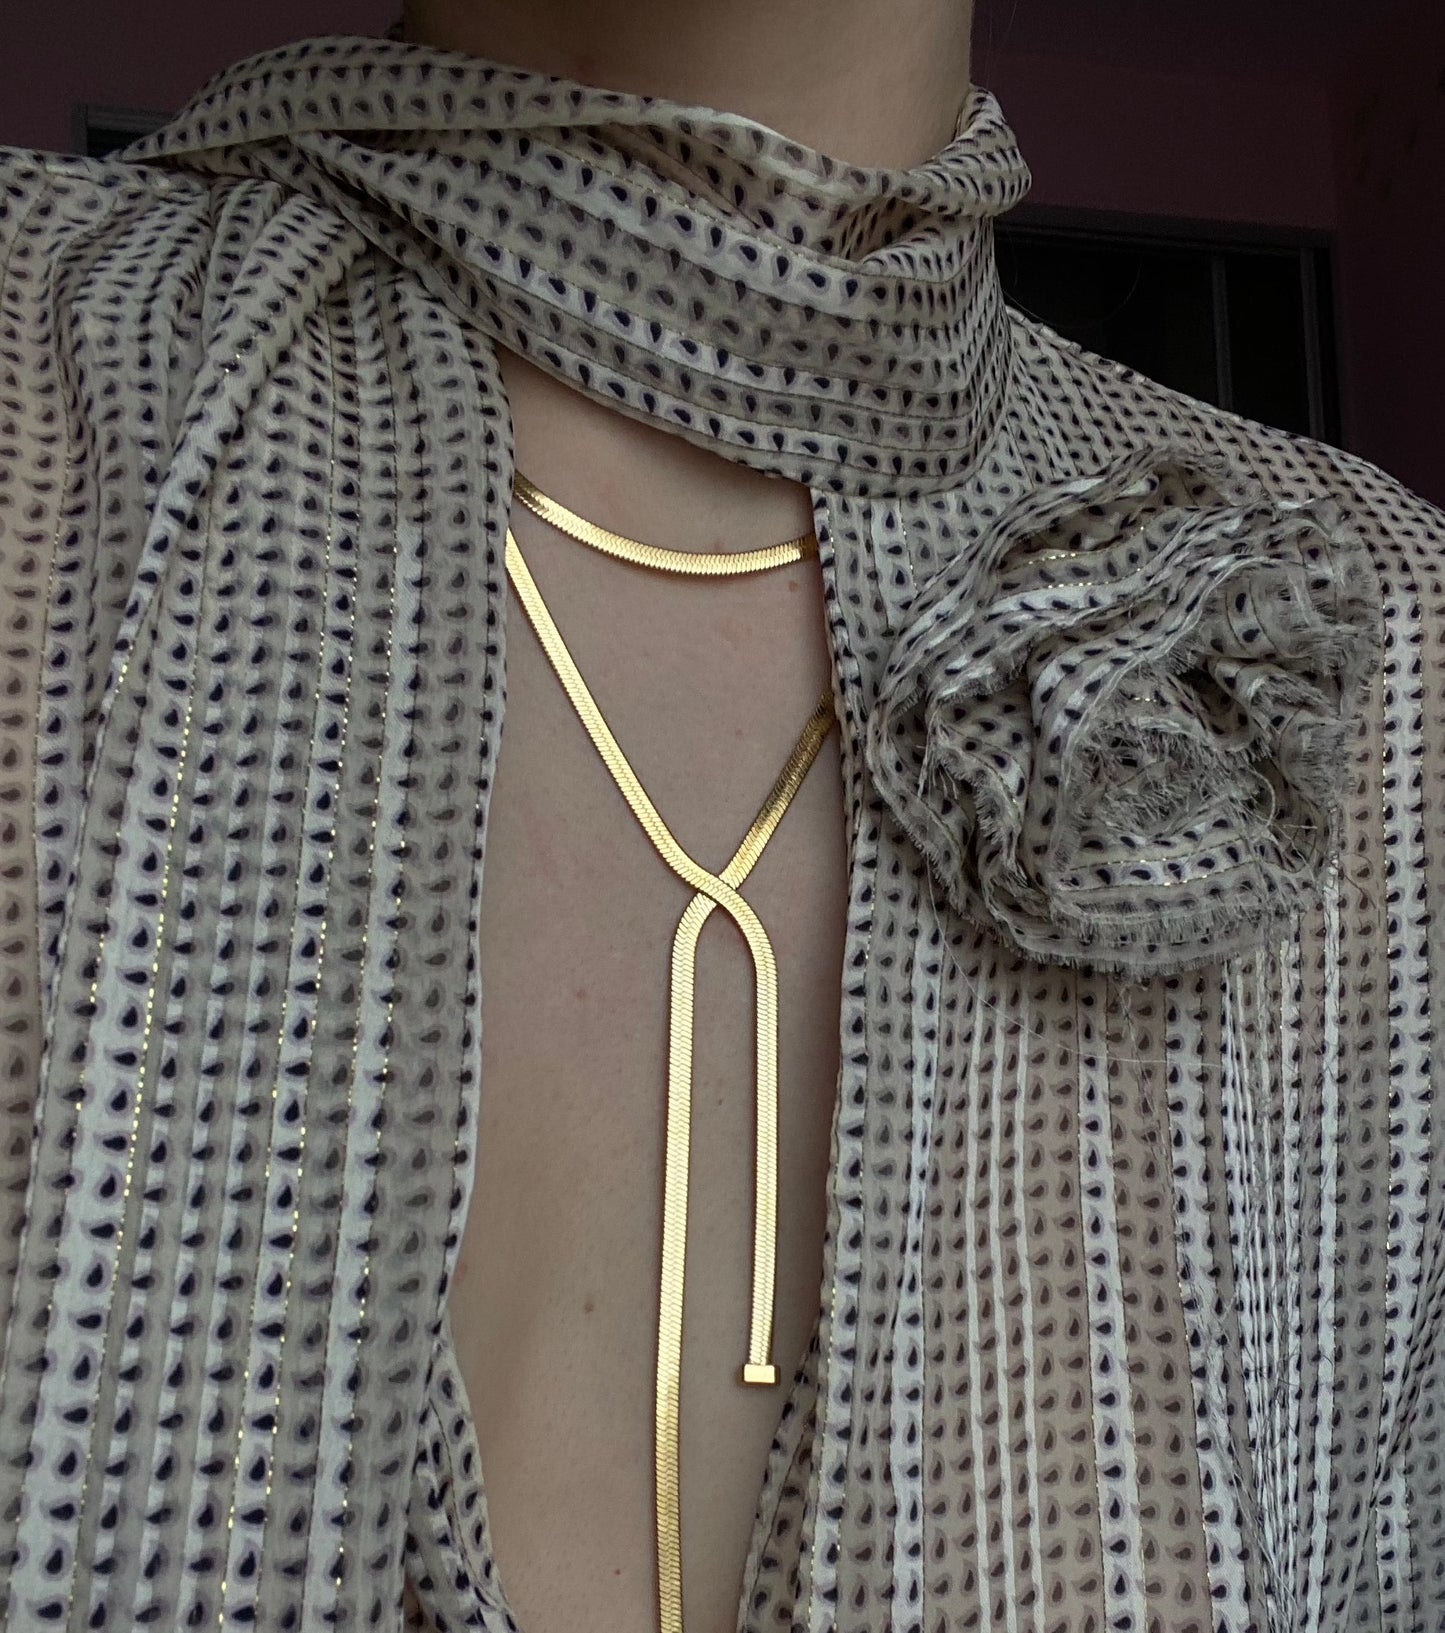 Flat Snake Chain Double Layered Necklace